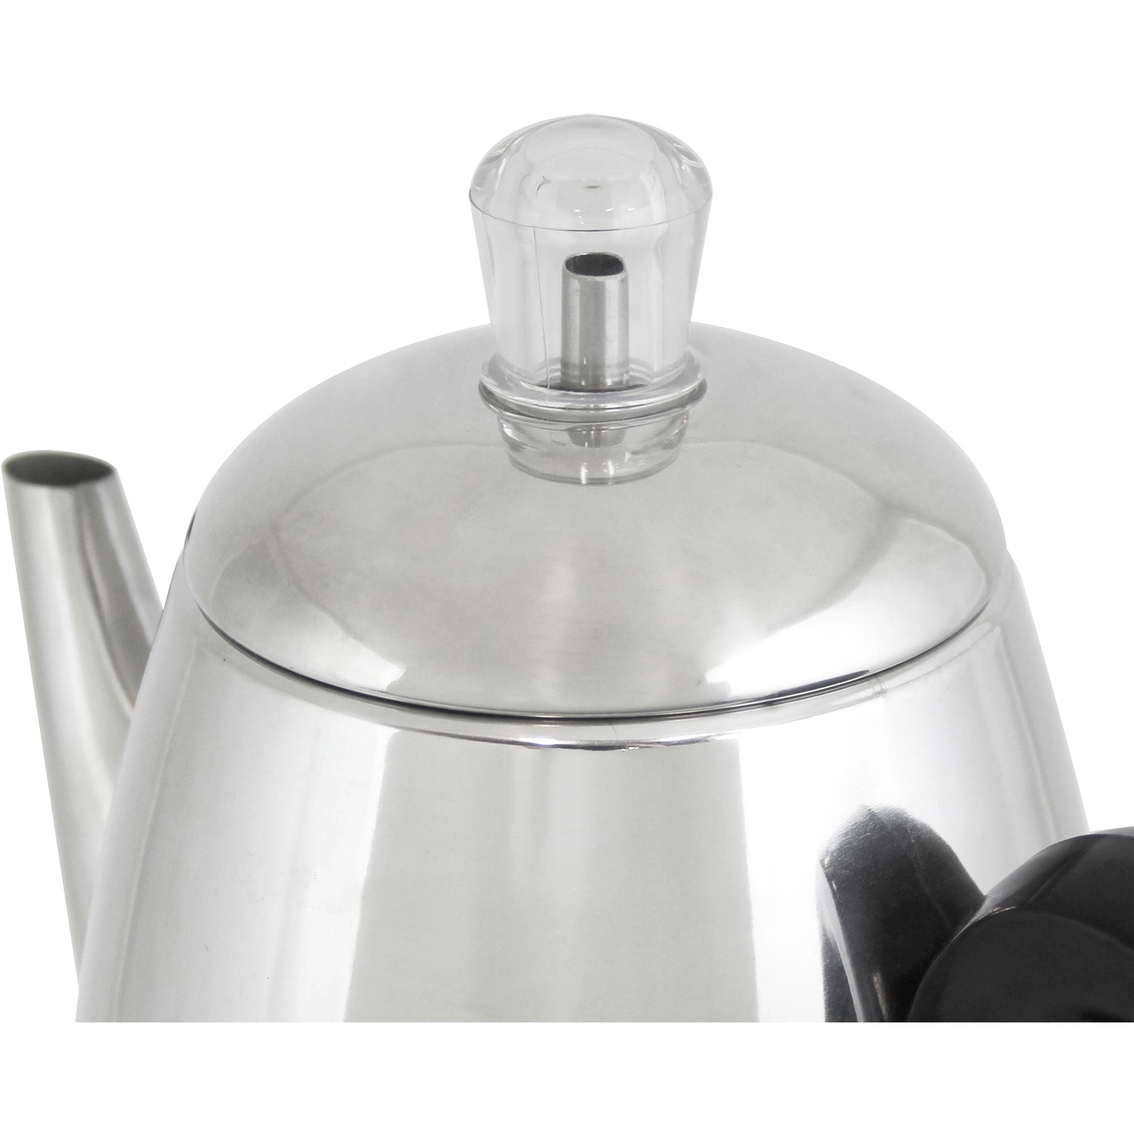 West Bend 12 Cup Stainless Steel Percolator - Image 4 of 6